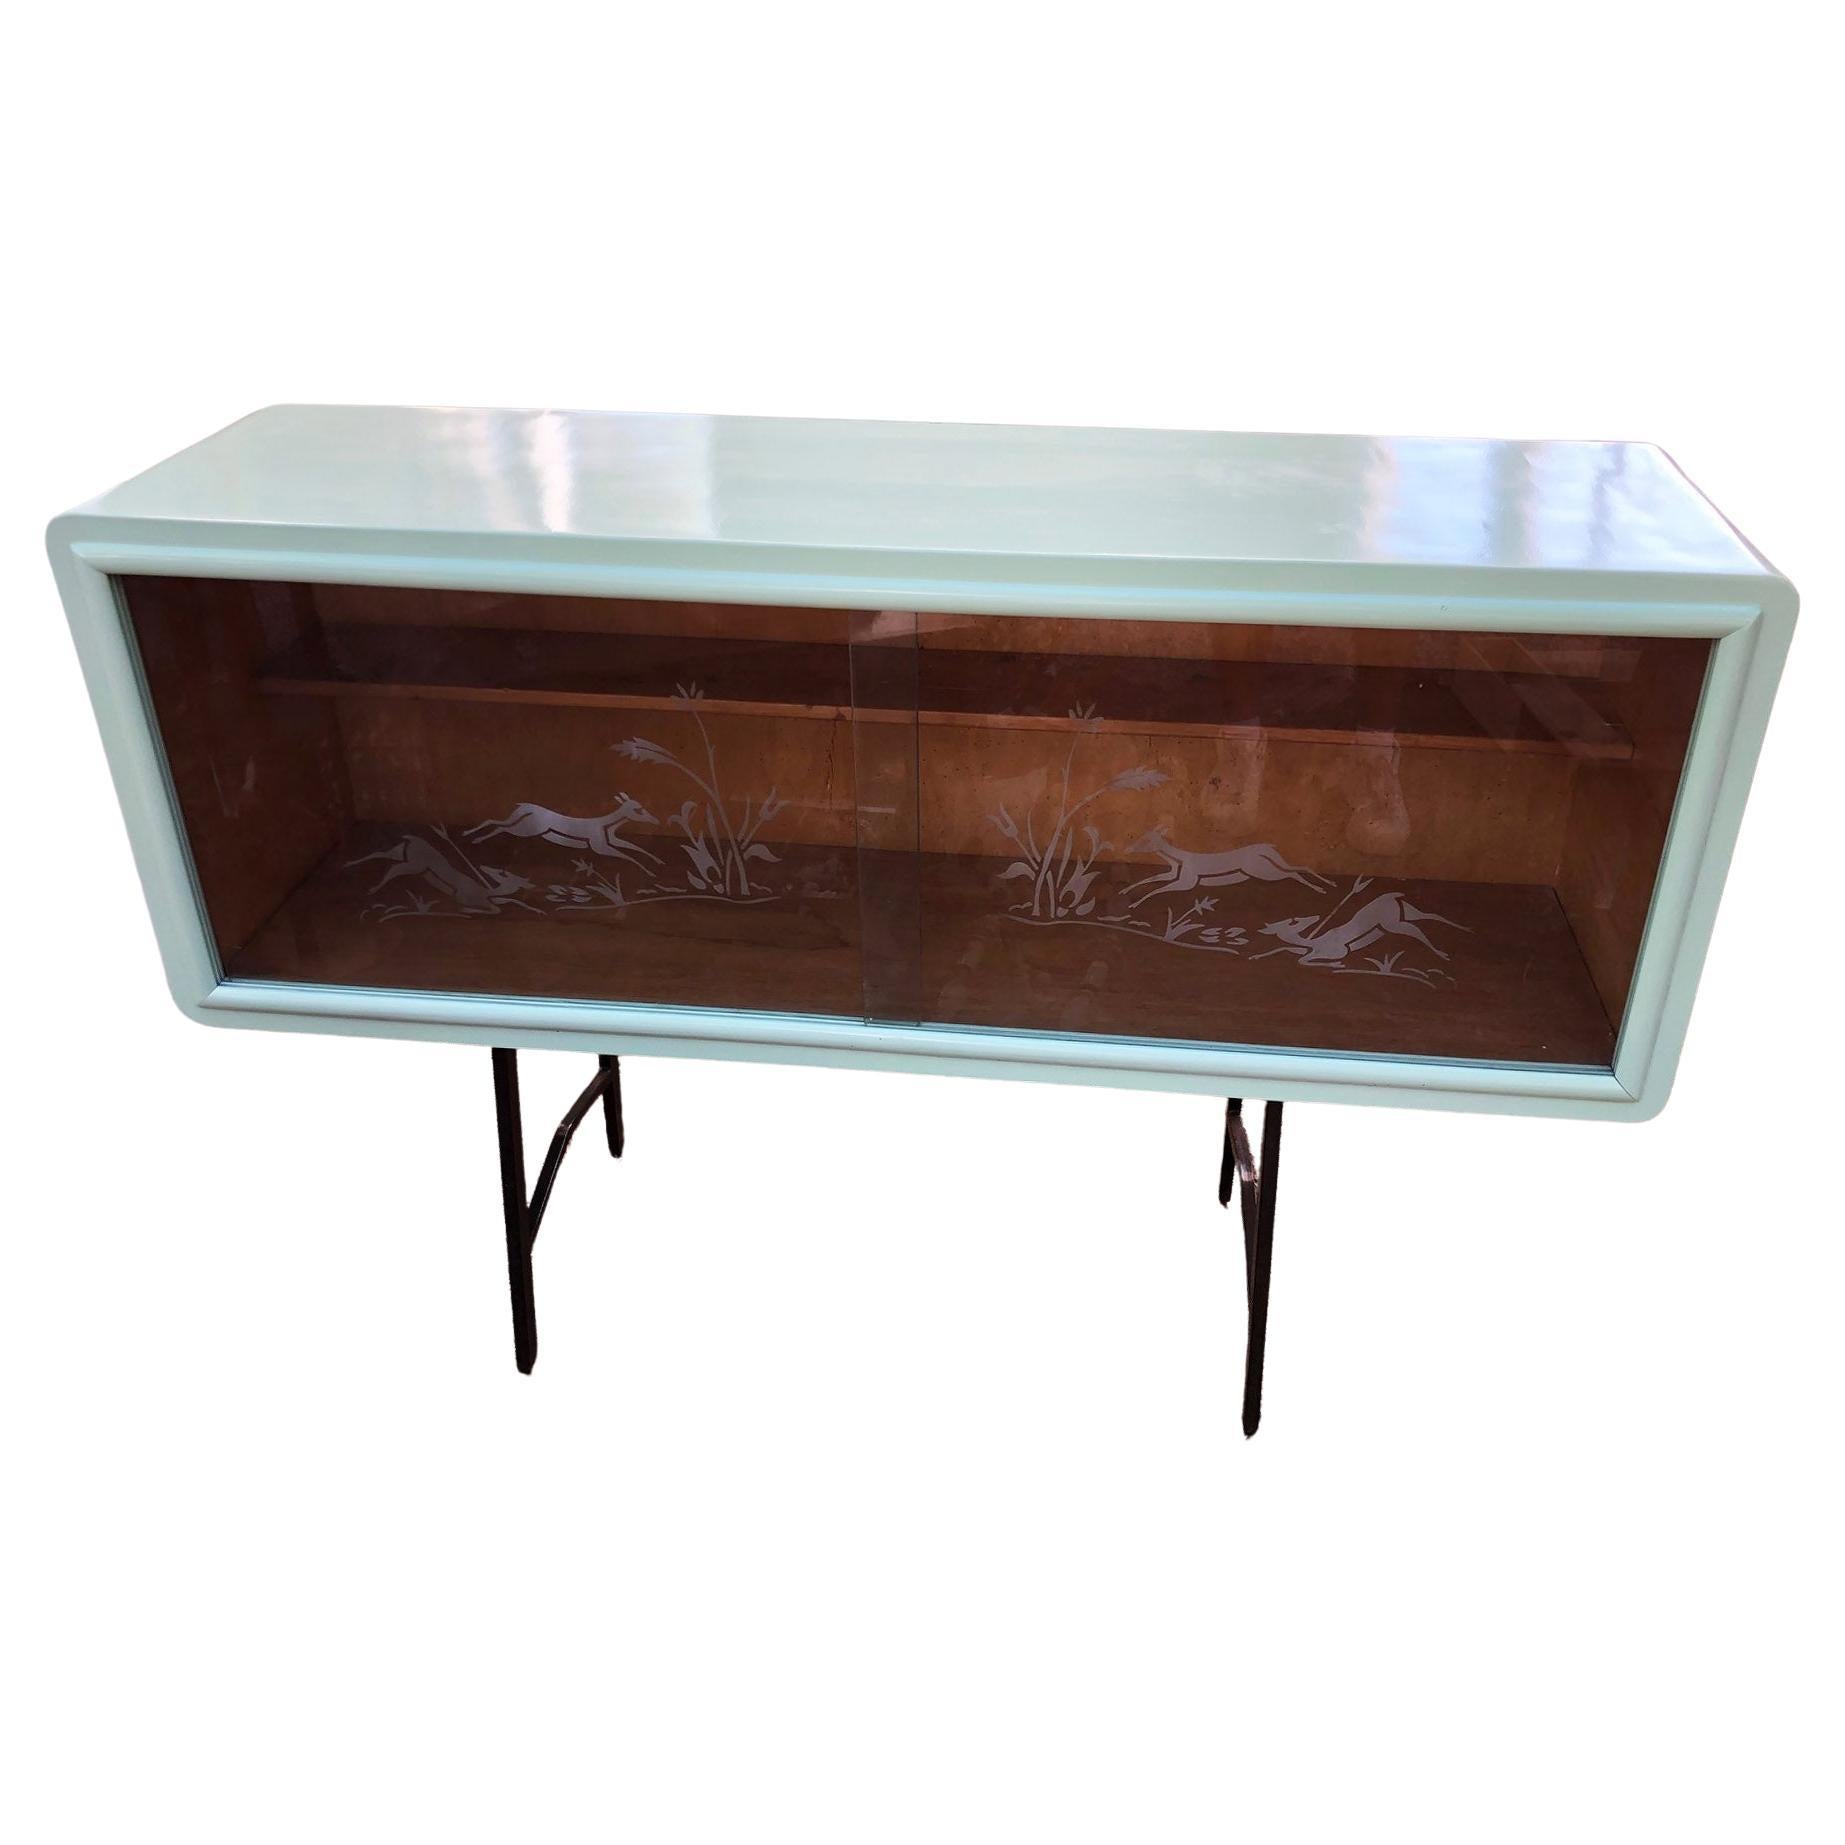 20th century green Italian sideboard, with sliding glass